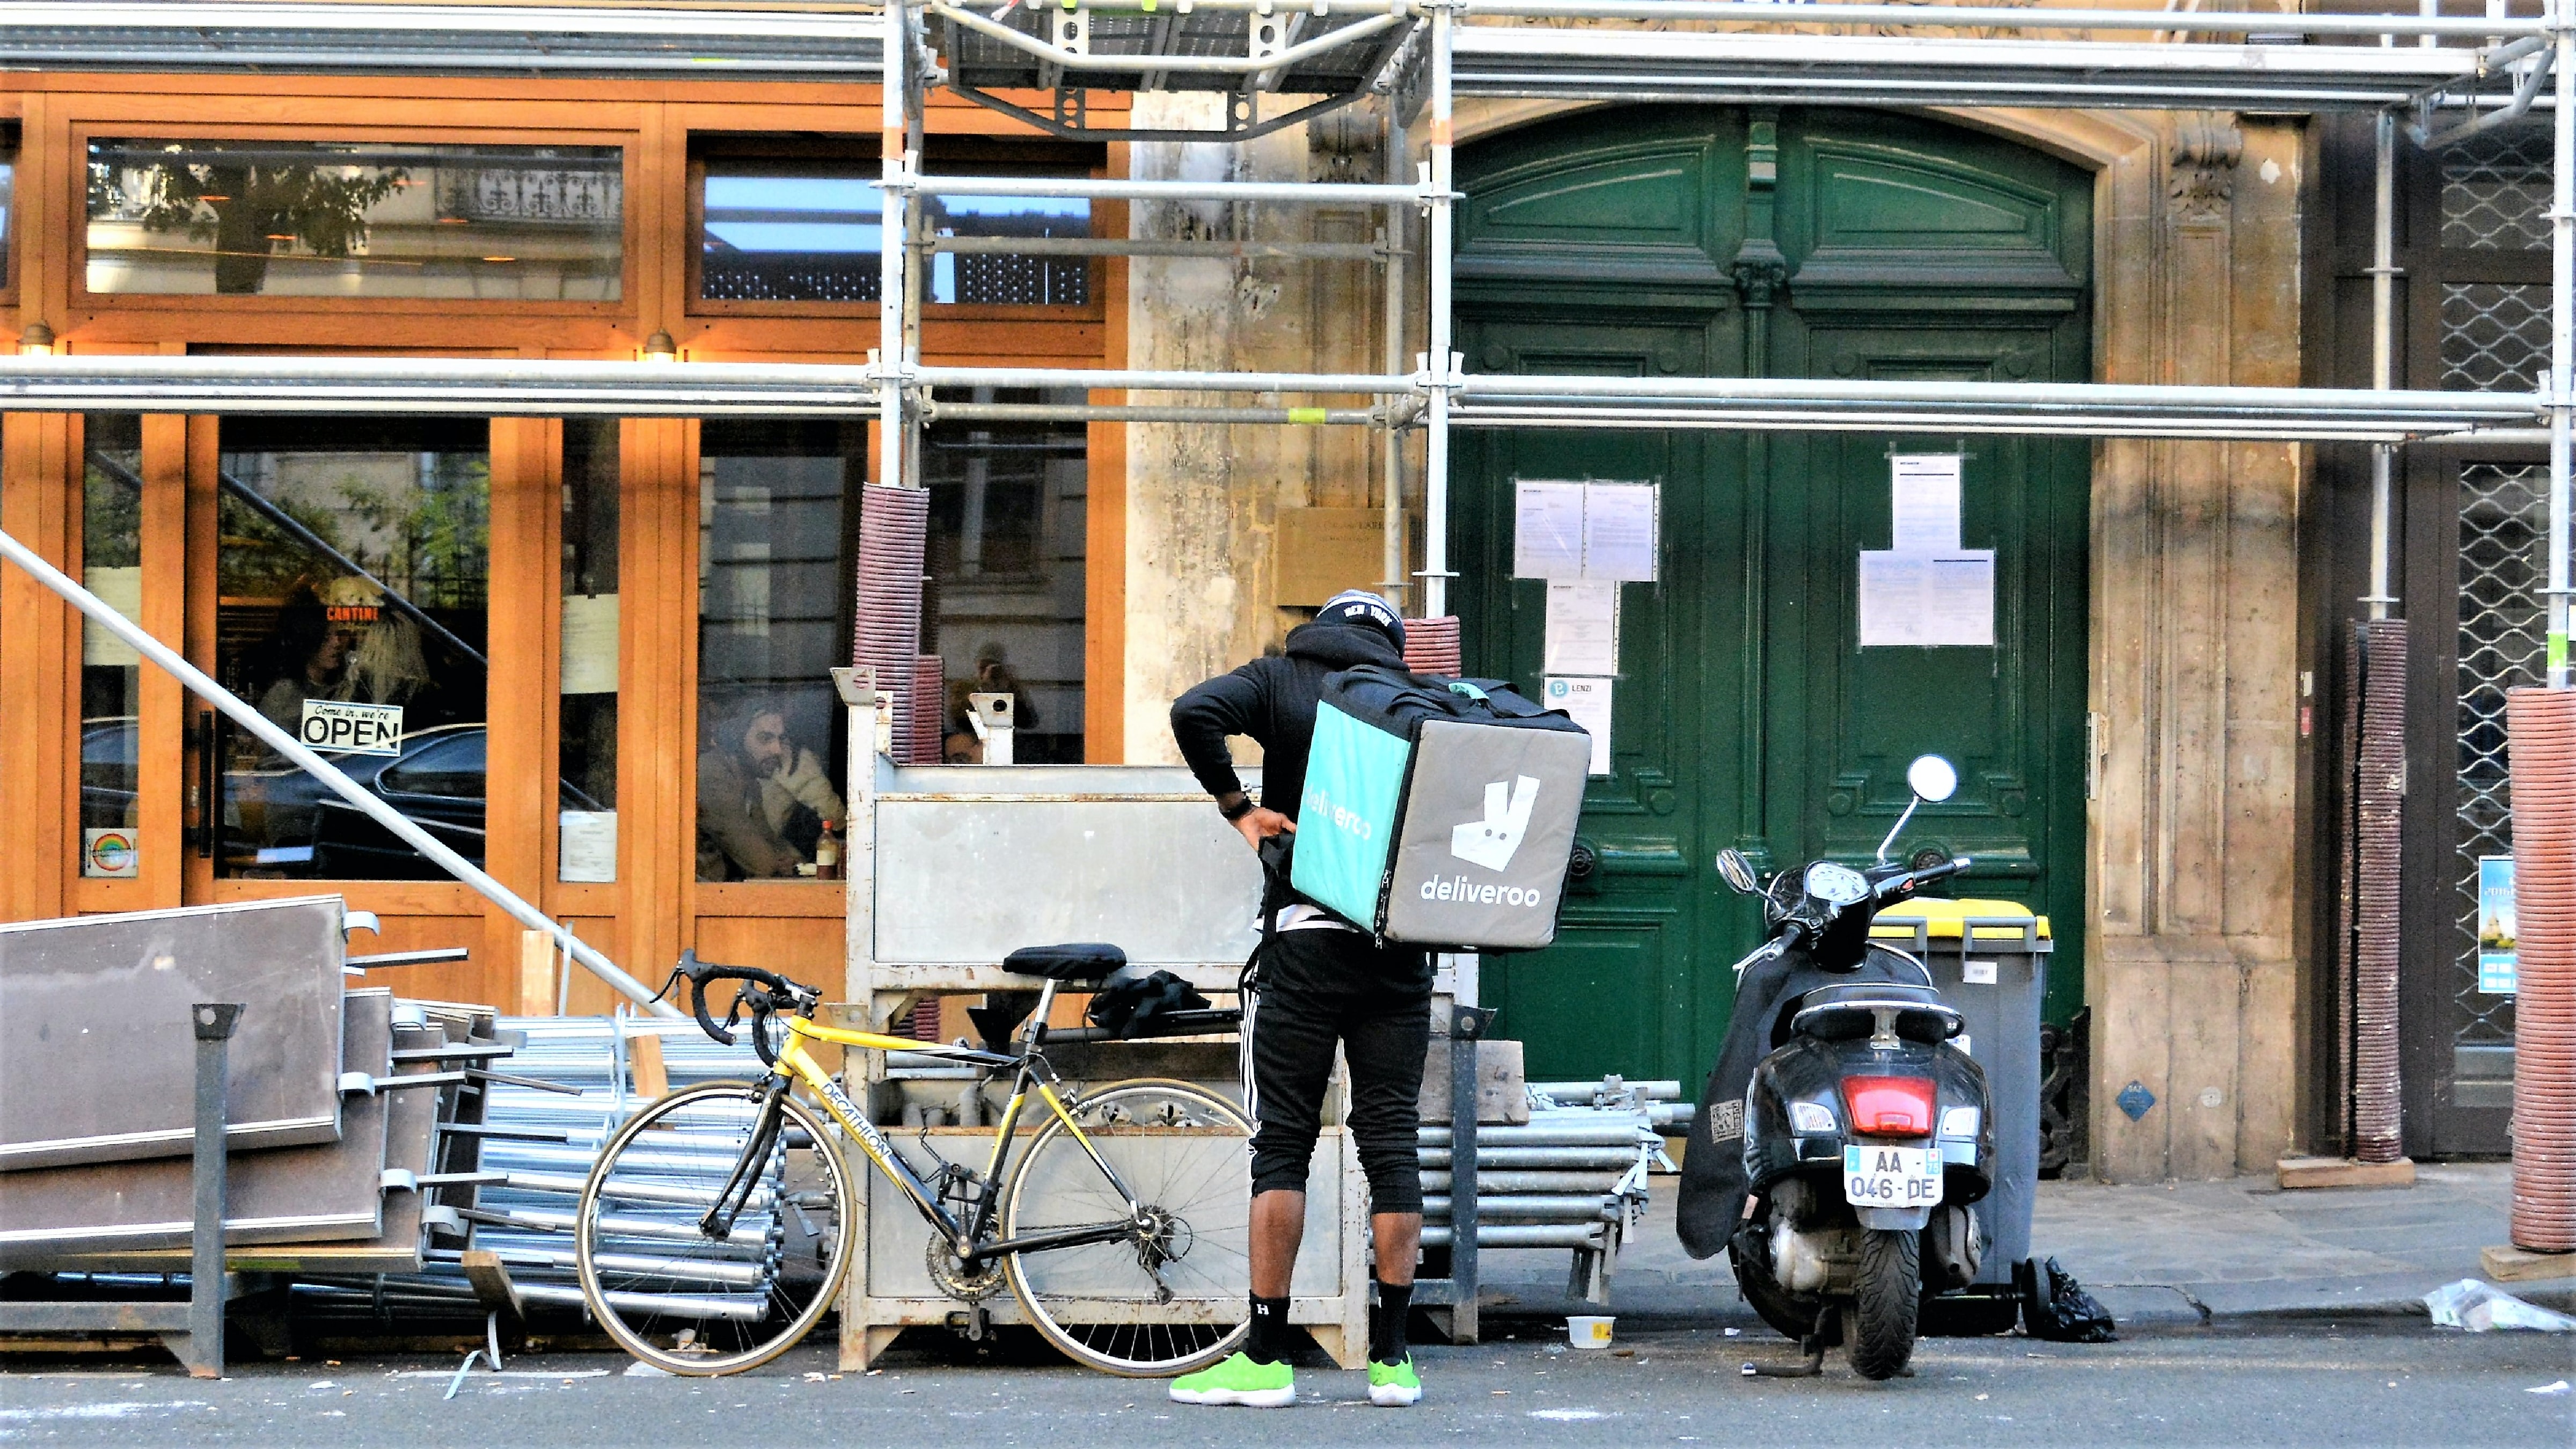 Deliveroo announces “thank you” bonuses up to £10,000 for riders 